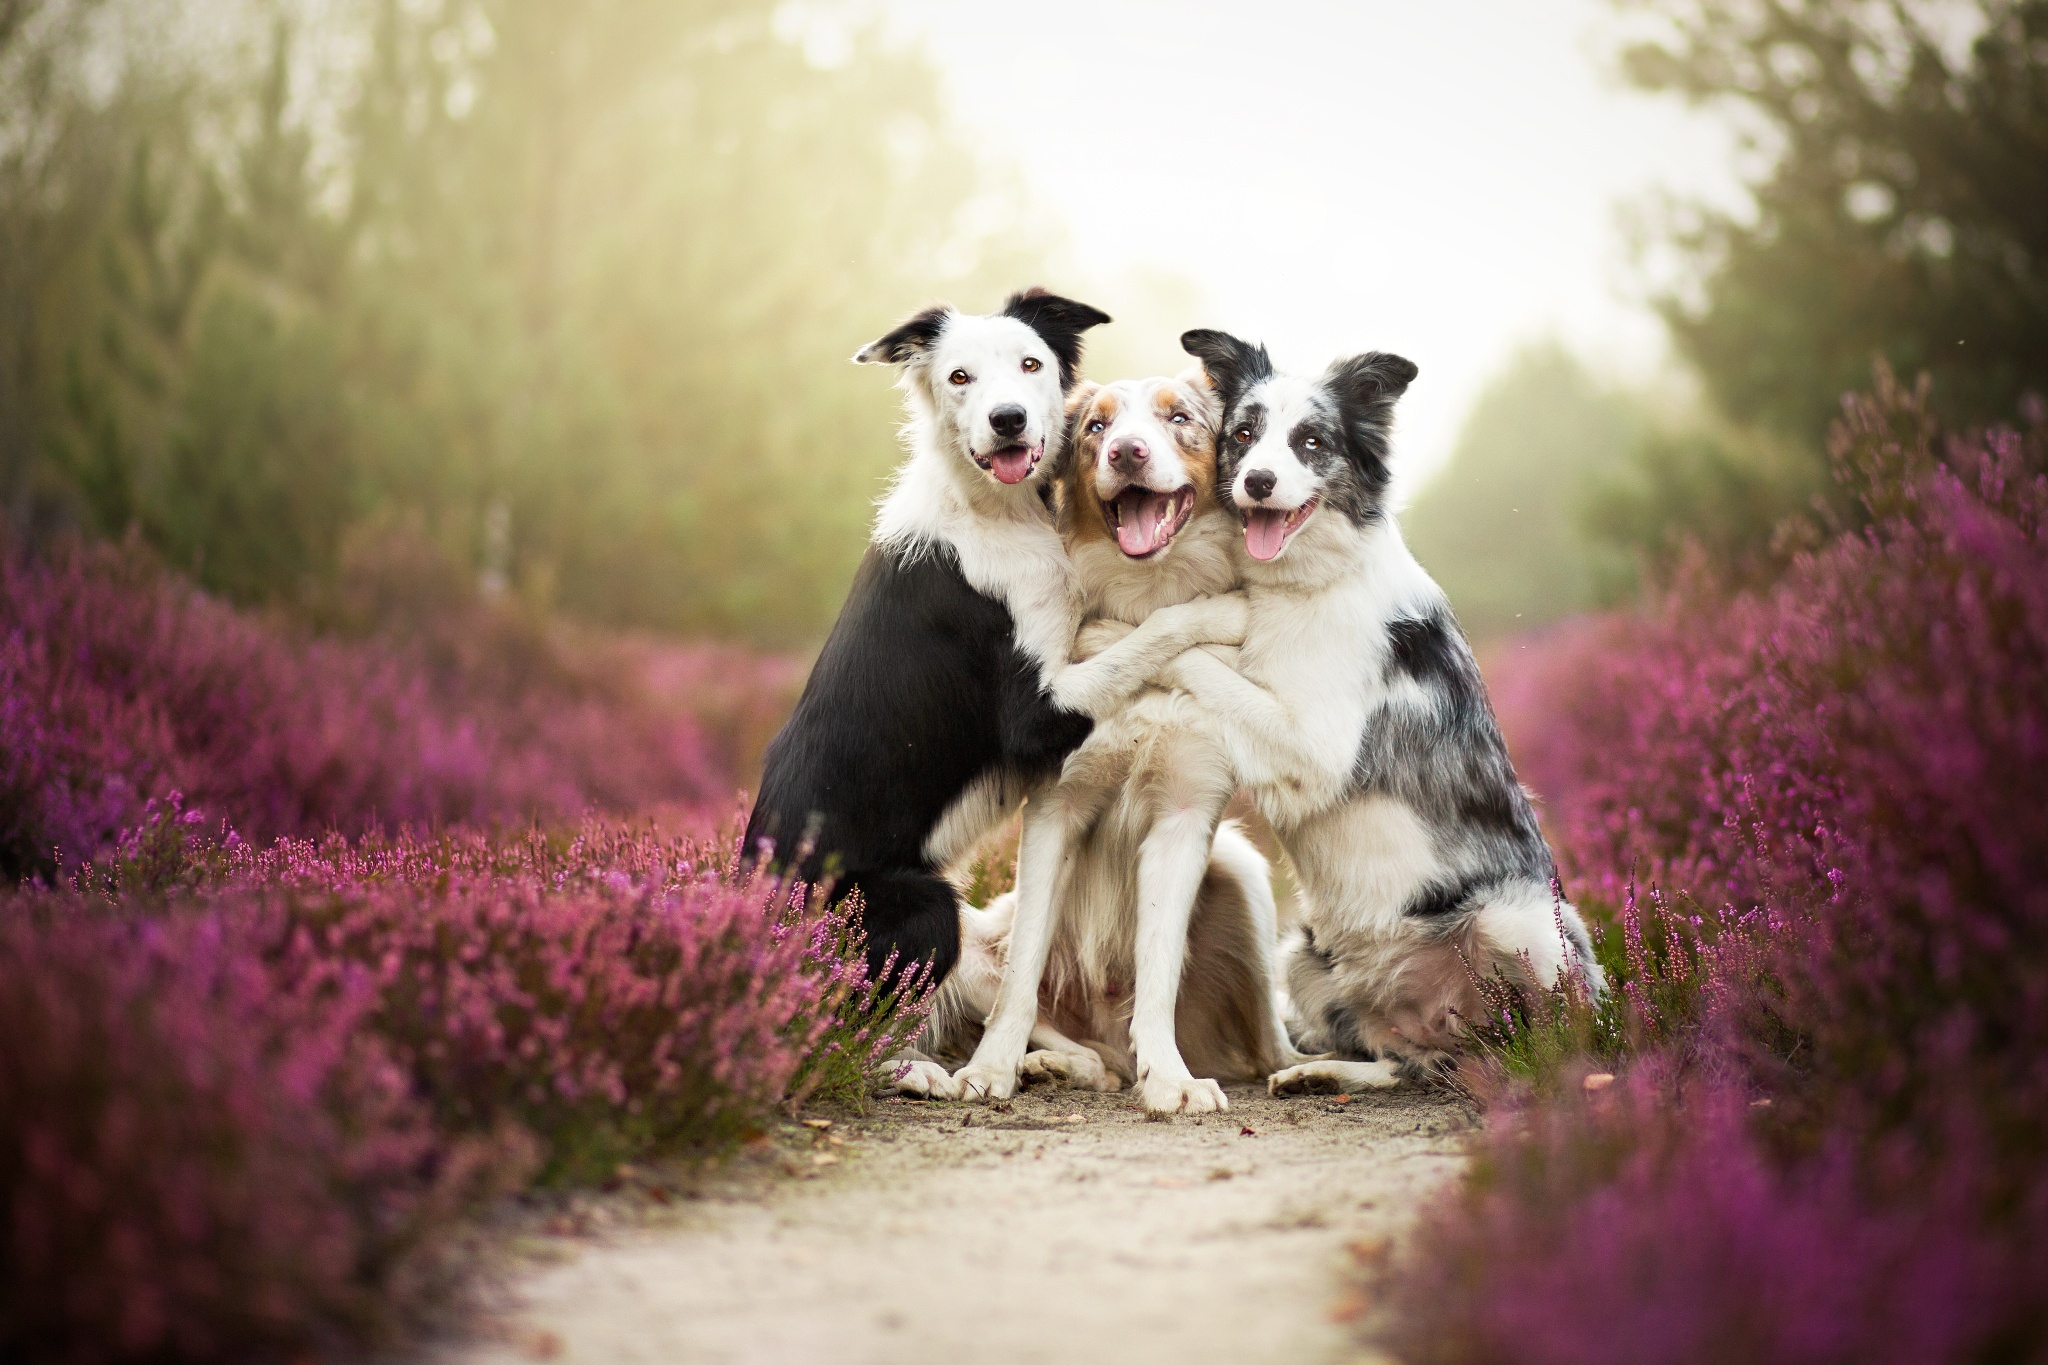 500px Blog » The passionate photographer community. » 30 Adorable ...